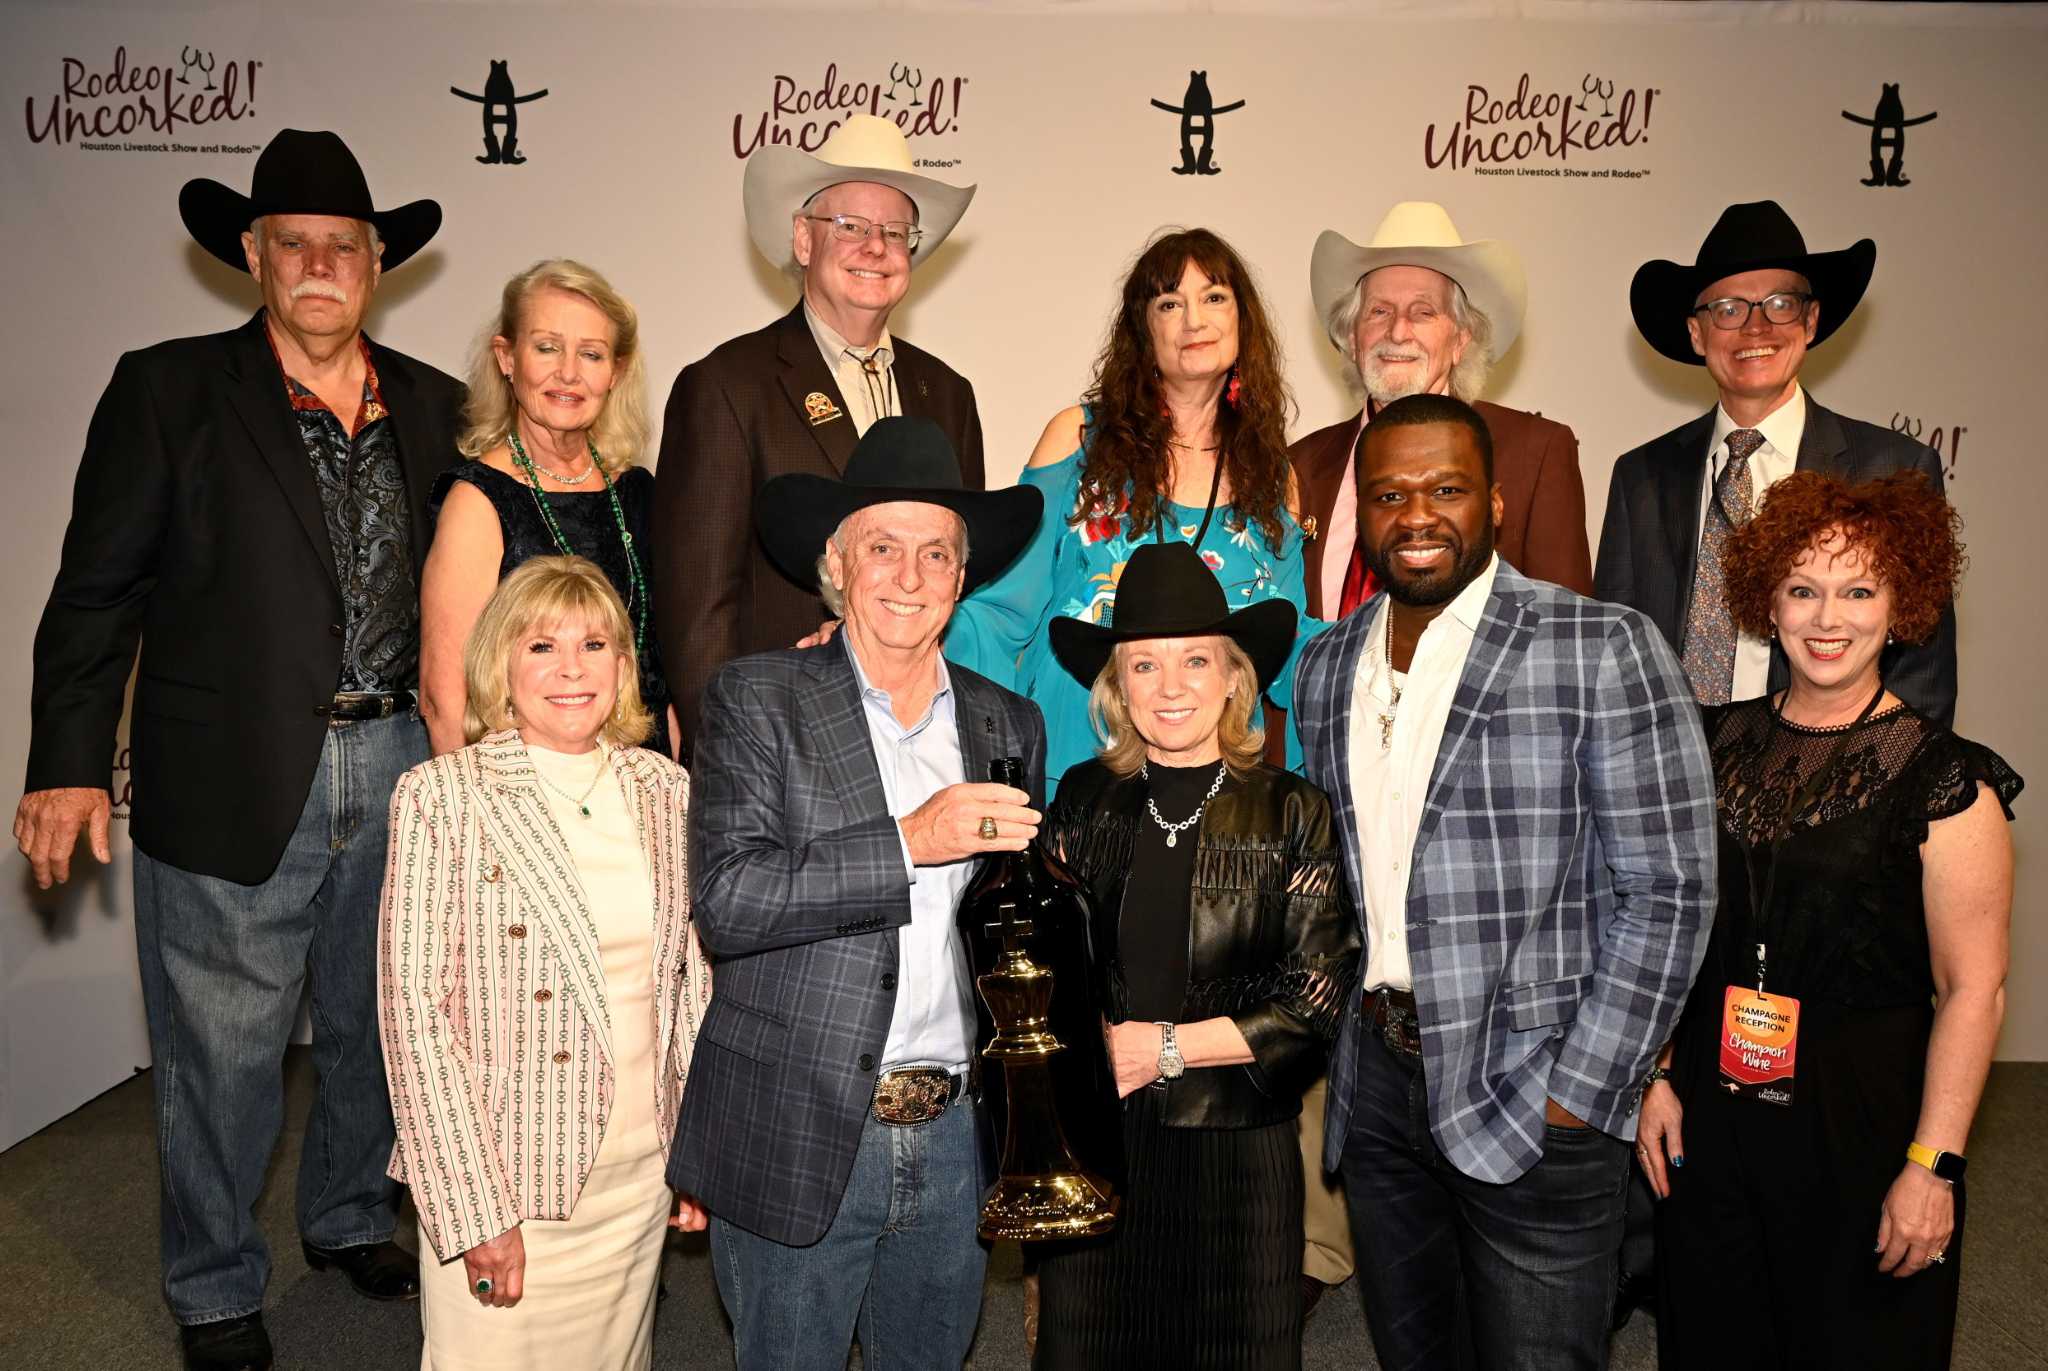 Houston Rodeo Uncorked wine auction sets records